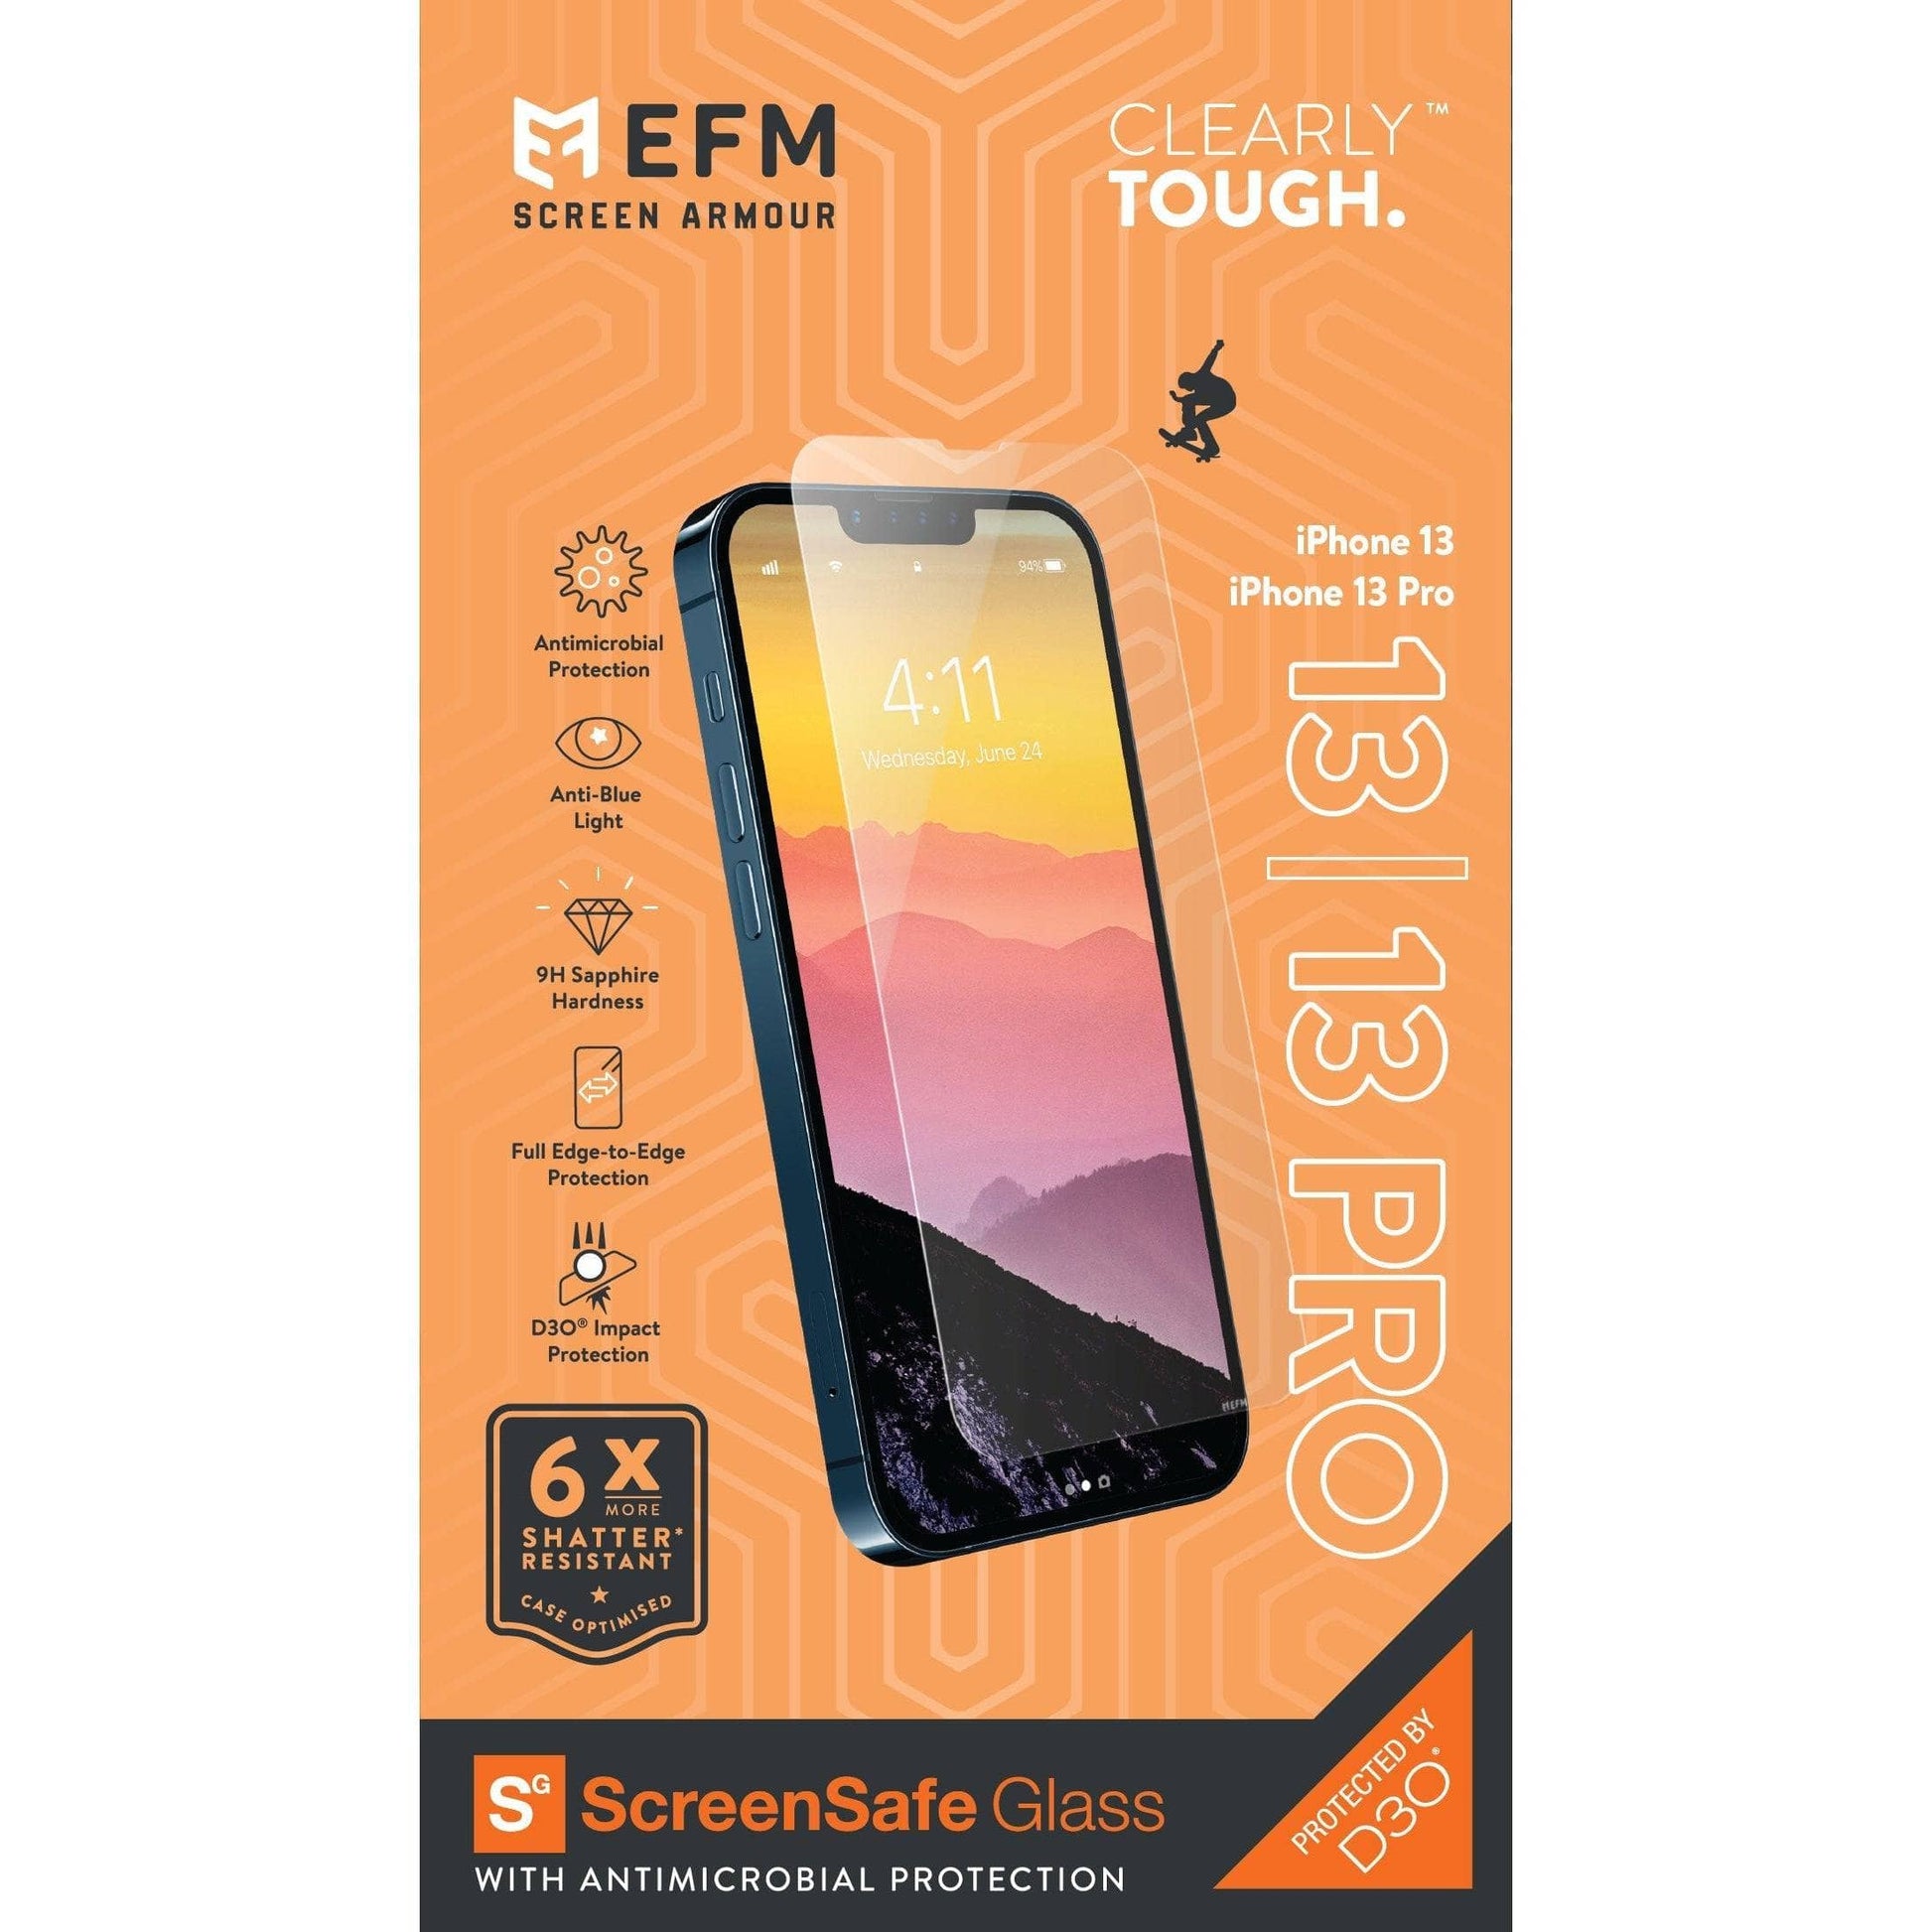 EFM ScreenSafe Glass Screen Armour with D3O - For iPhone 13 (6.1" and 6.1" Pro) - Clear-Screen Guards - Mobile Devices-EFM-www.PhoneGuy.com.au